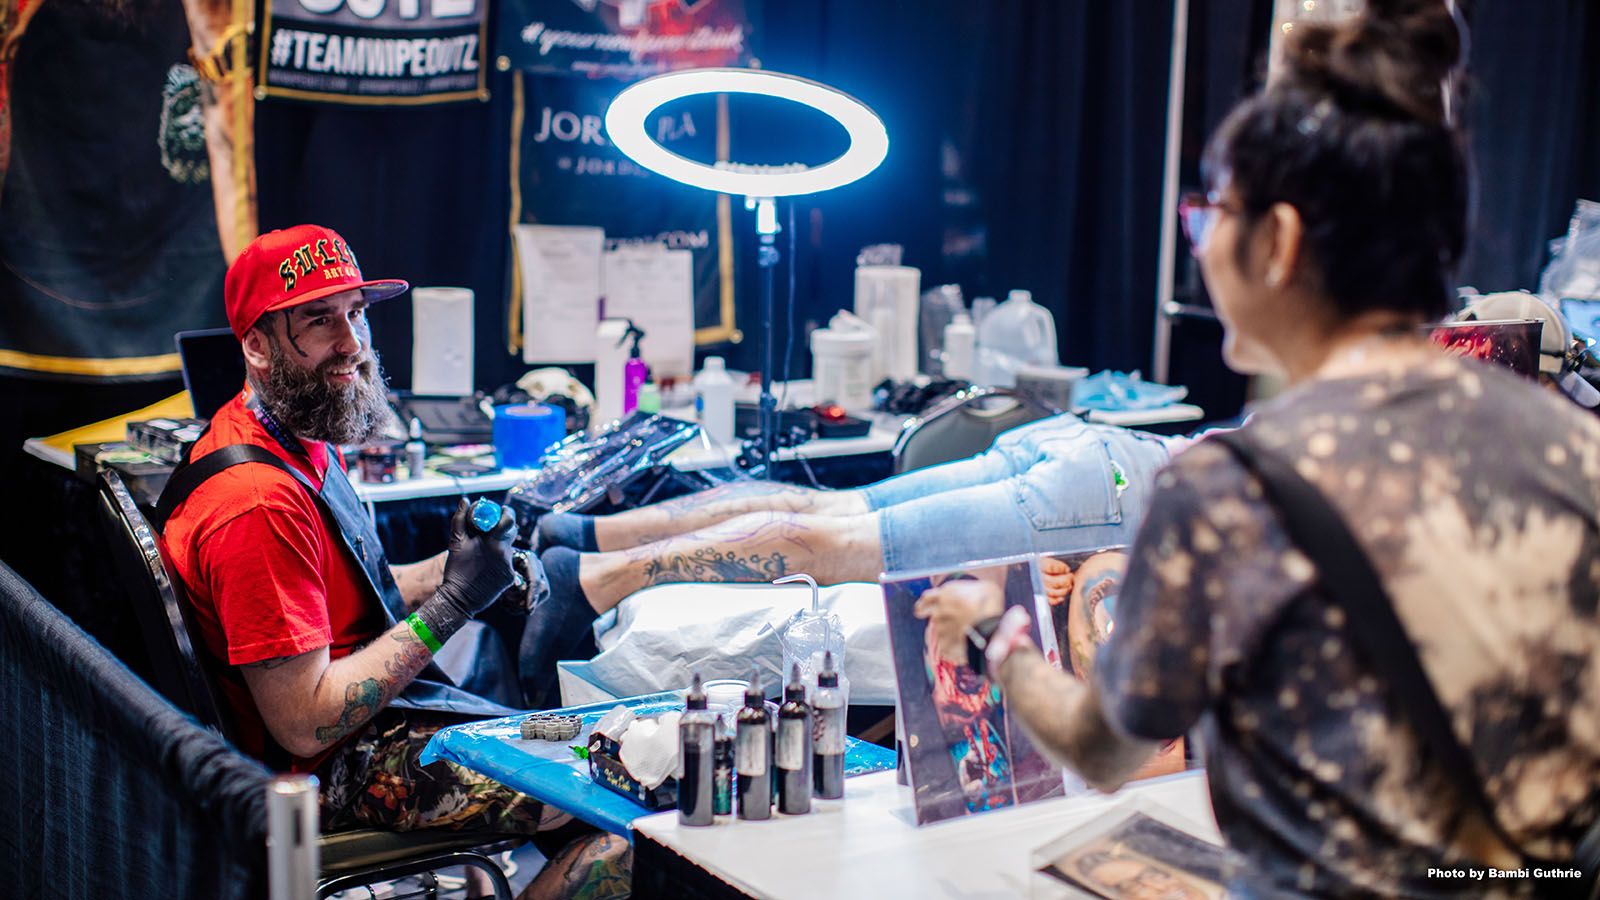 More than 200 artists are slated for the Fort Wayne Tattoo Festival at the Grand Wayne Convention Center on Friday-Sunday, Aug. 11-13.